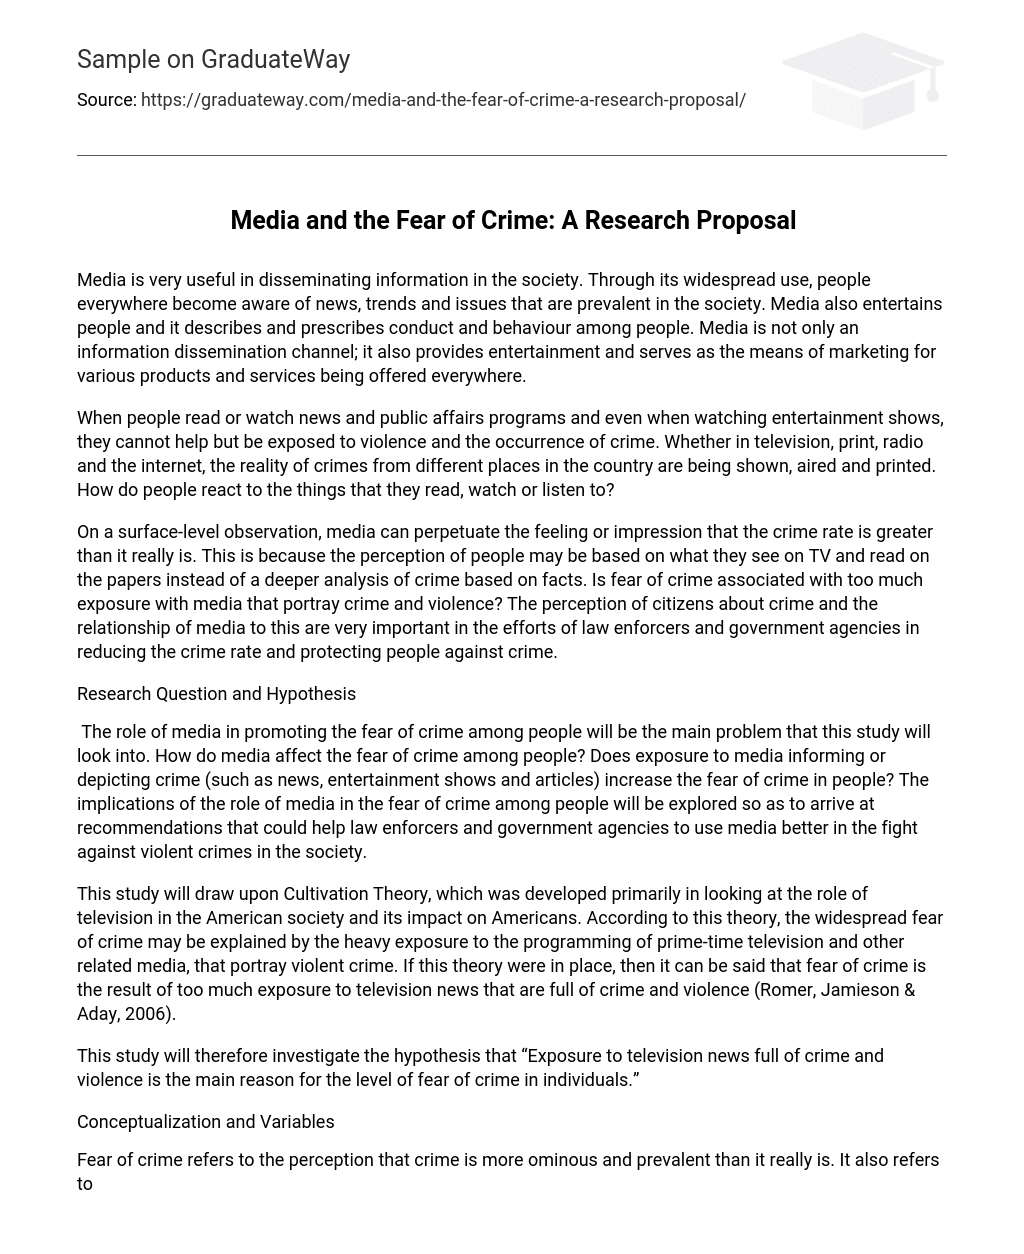 Media and the Fear of Crime: A Research Proposal